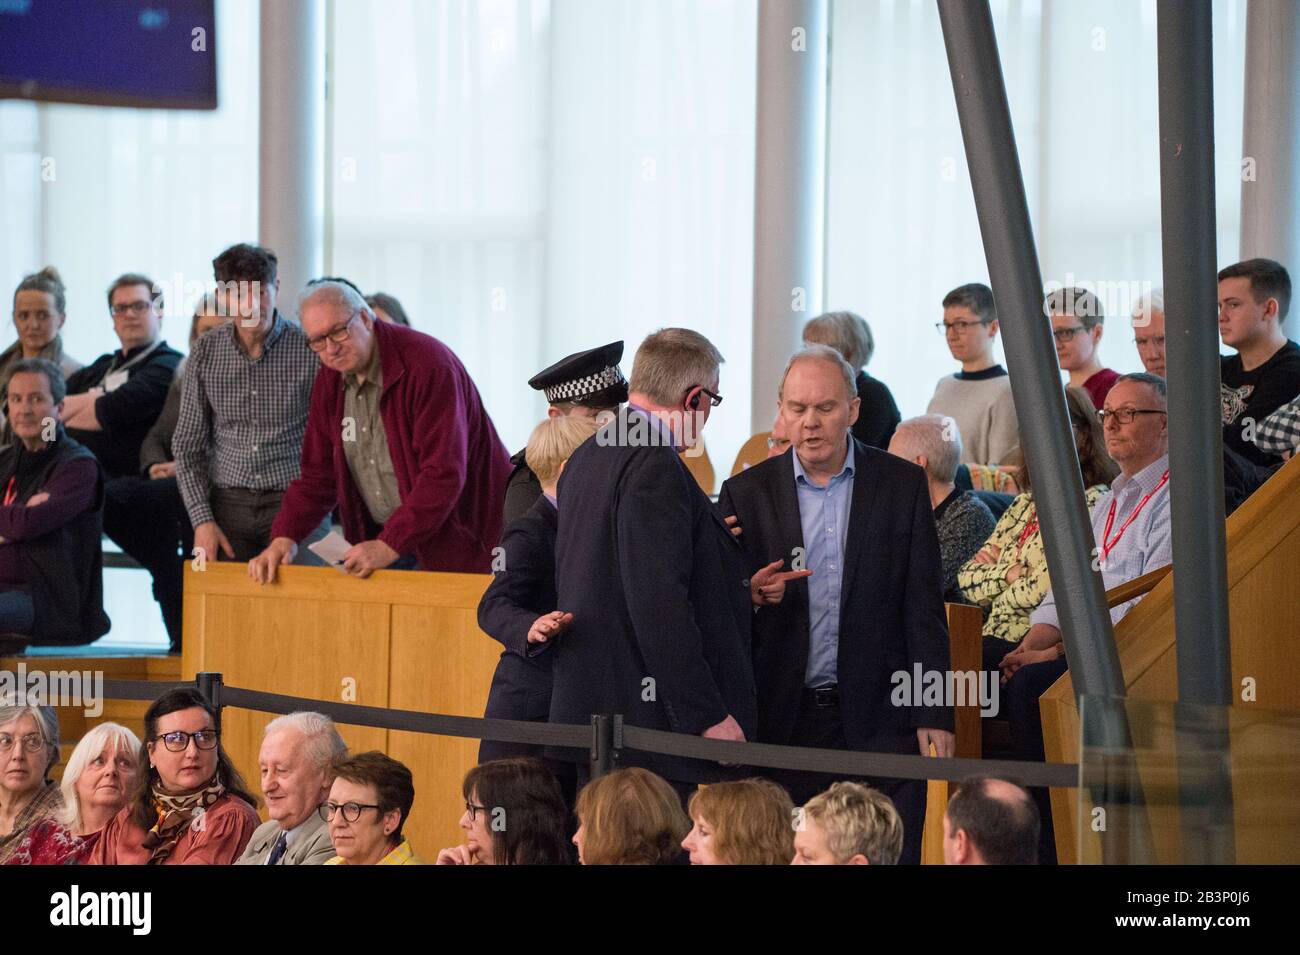 Edinburgh, UK. 5th Mar, 2020. Pictured: A protestor is escorted out of the gallery in the debating chamber during the end of First Ministers Questions. Parliament was suspended whilst the protestor was escorted outside by Police and security. Scenes from First Ministers Questions at the Scottish Parliament in Holyrood, Edinburgh. Credit: Colin Fisher/Alamy Live News Stock Photo